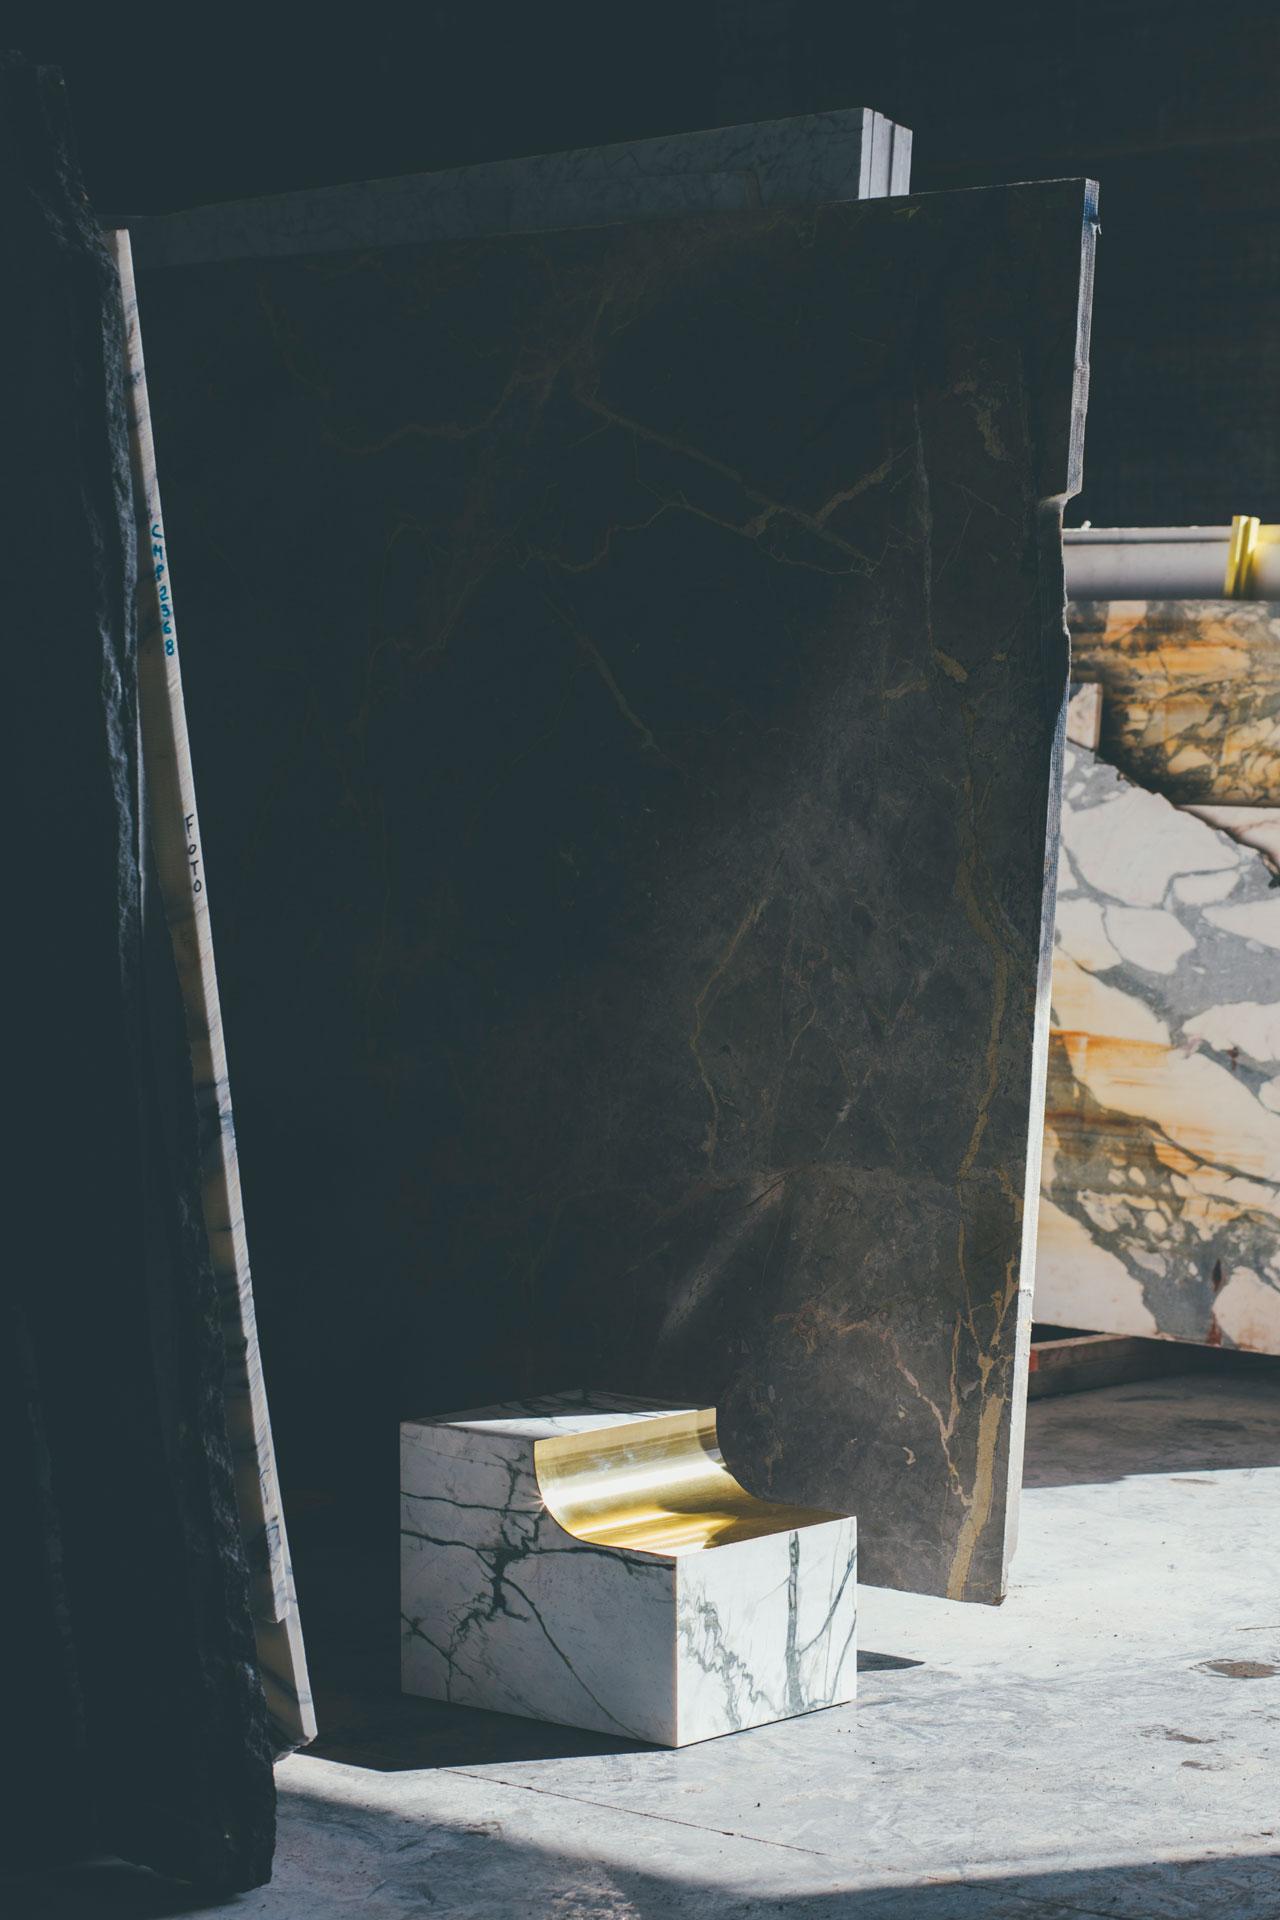 arch 01.1 c is a stool or side table. Its strong design language sets arch 01.1 c apart. 
The marble object is beautifully finished with a metal surface. Brass giving it a pop of gold. 
Without an obvious front, back, top or bottom, the object can